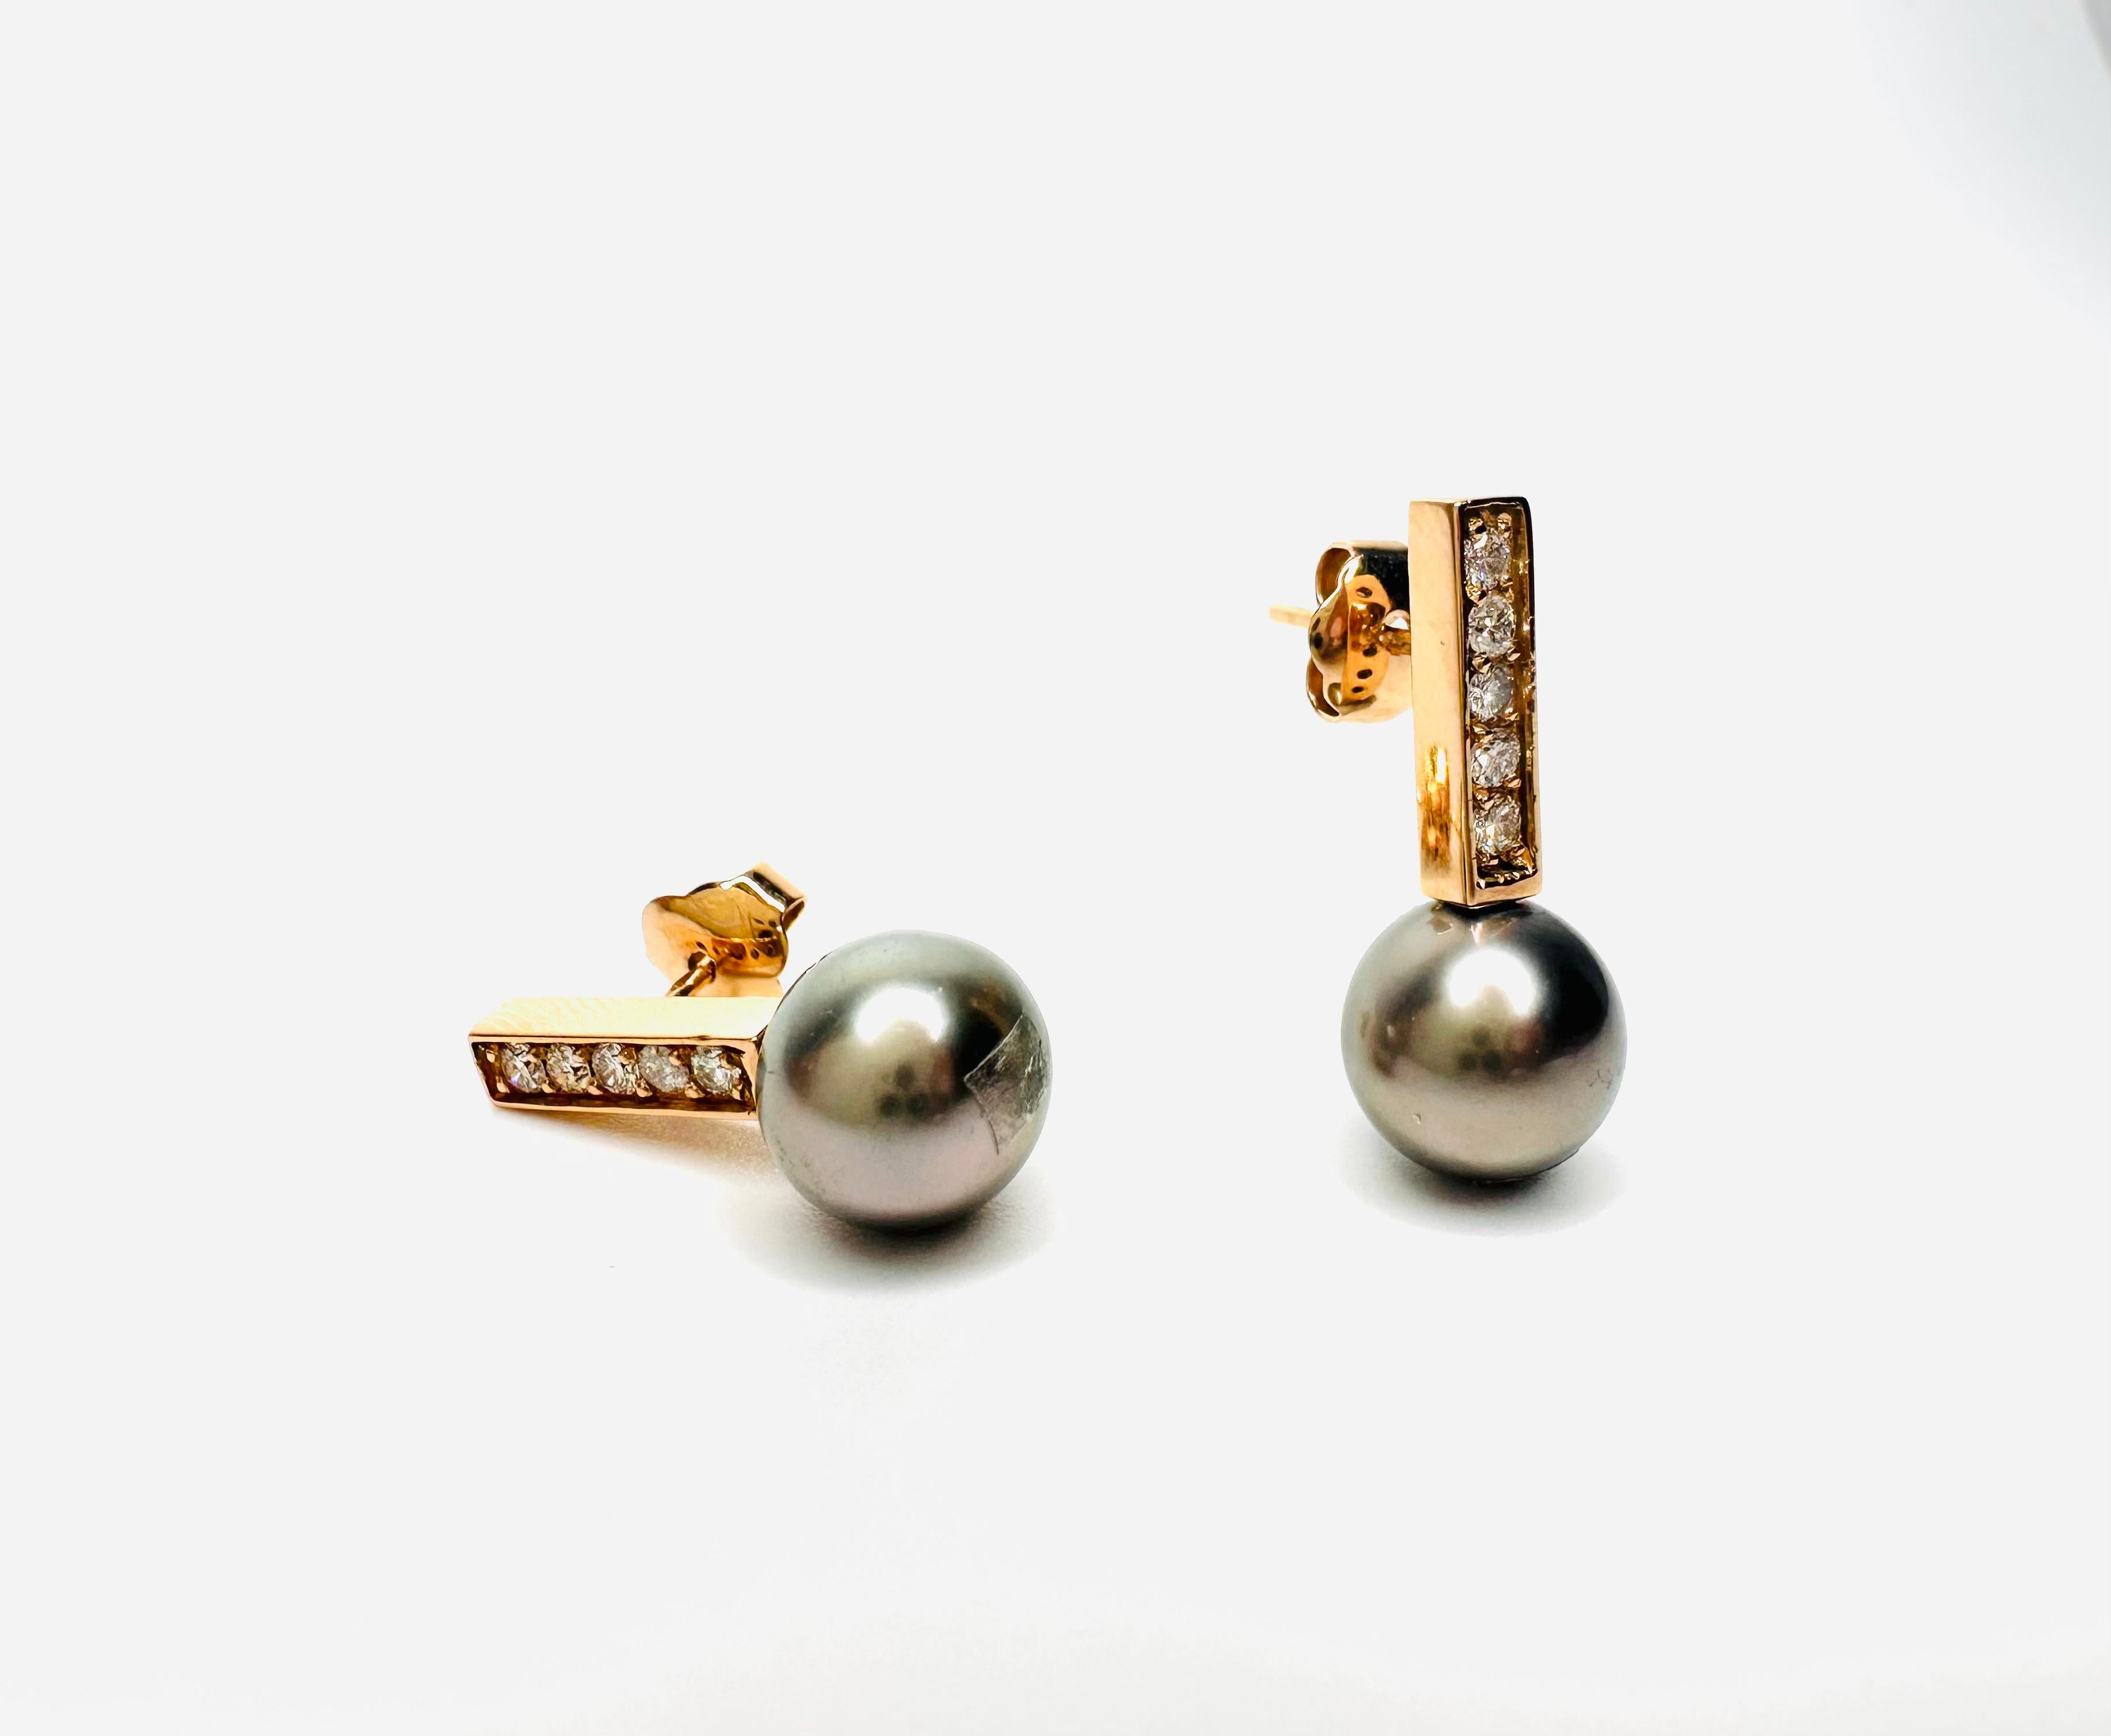 Pair of earrings made of 18kt pink gold and featuring Tahitian Culture Pearls, spherical lead green, 9.5 and 9.6 mm, GemA+ quality.
The set of earrings has 10 round diamonds of 2mm each for a total of 0.365 carats.
Earrings with the sparkle of